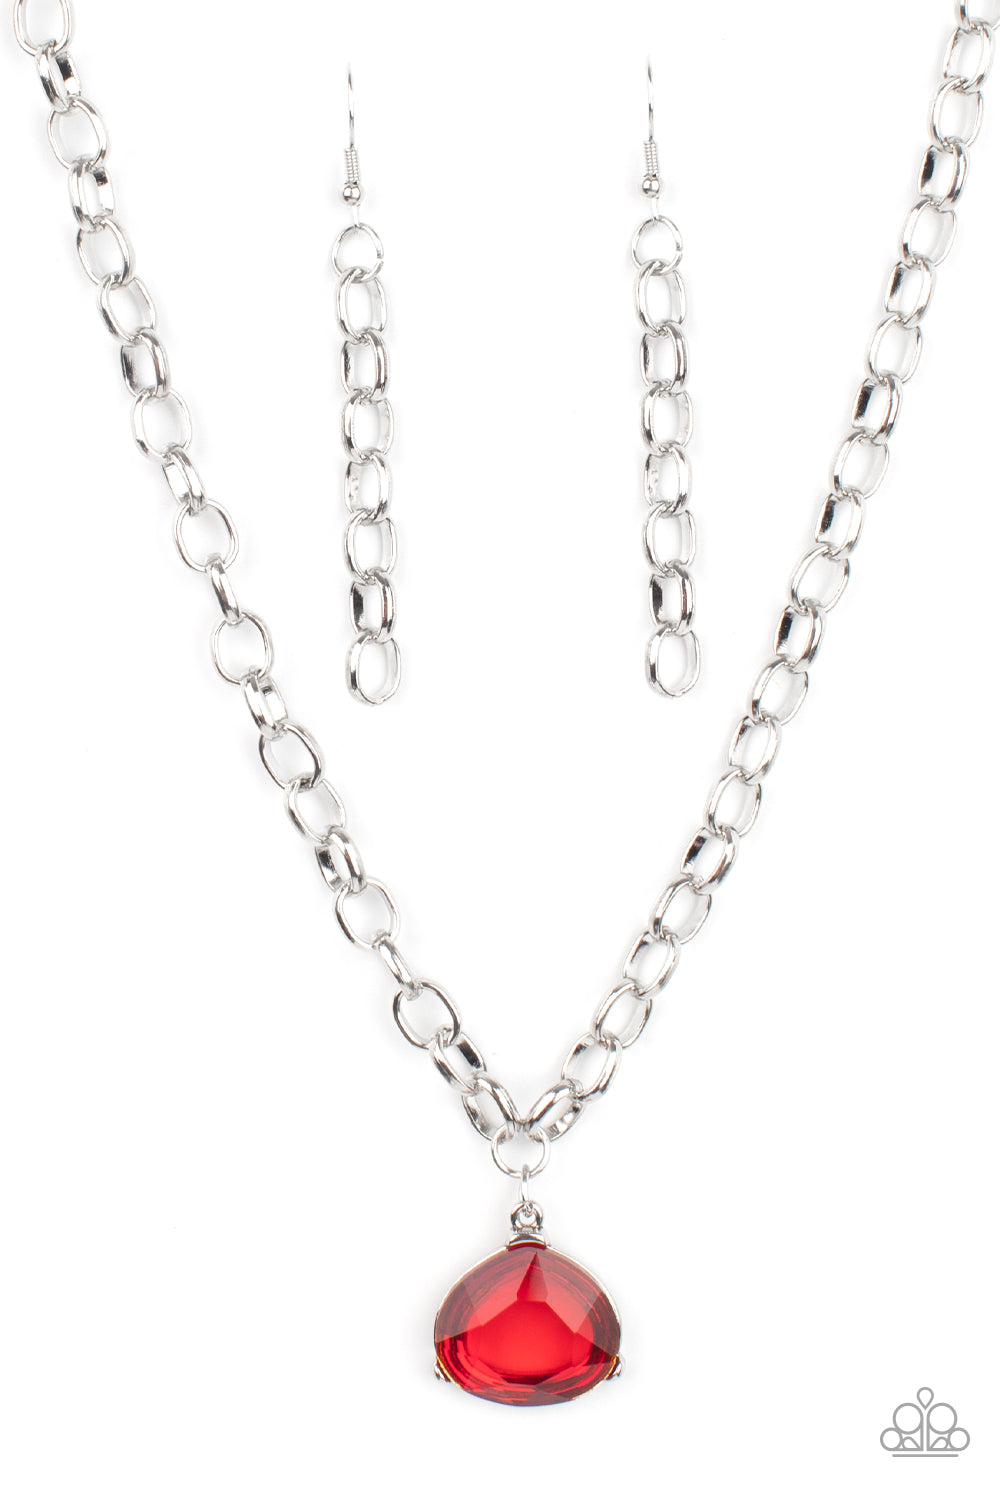 Gallery Gem - Red necklace